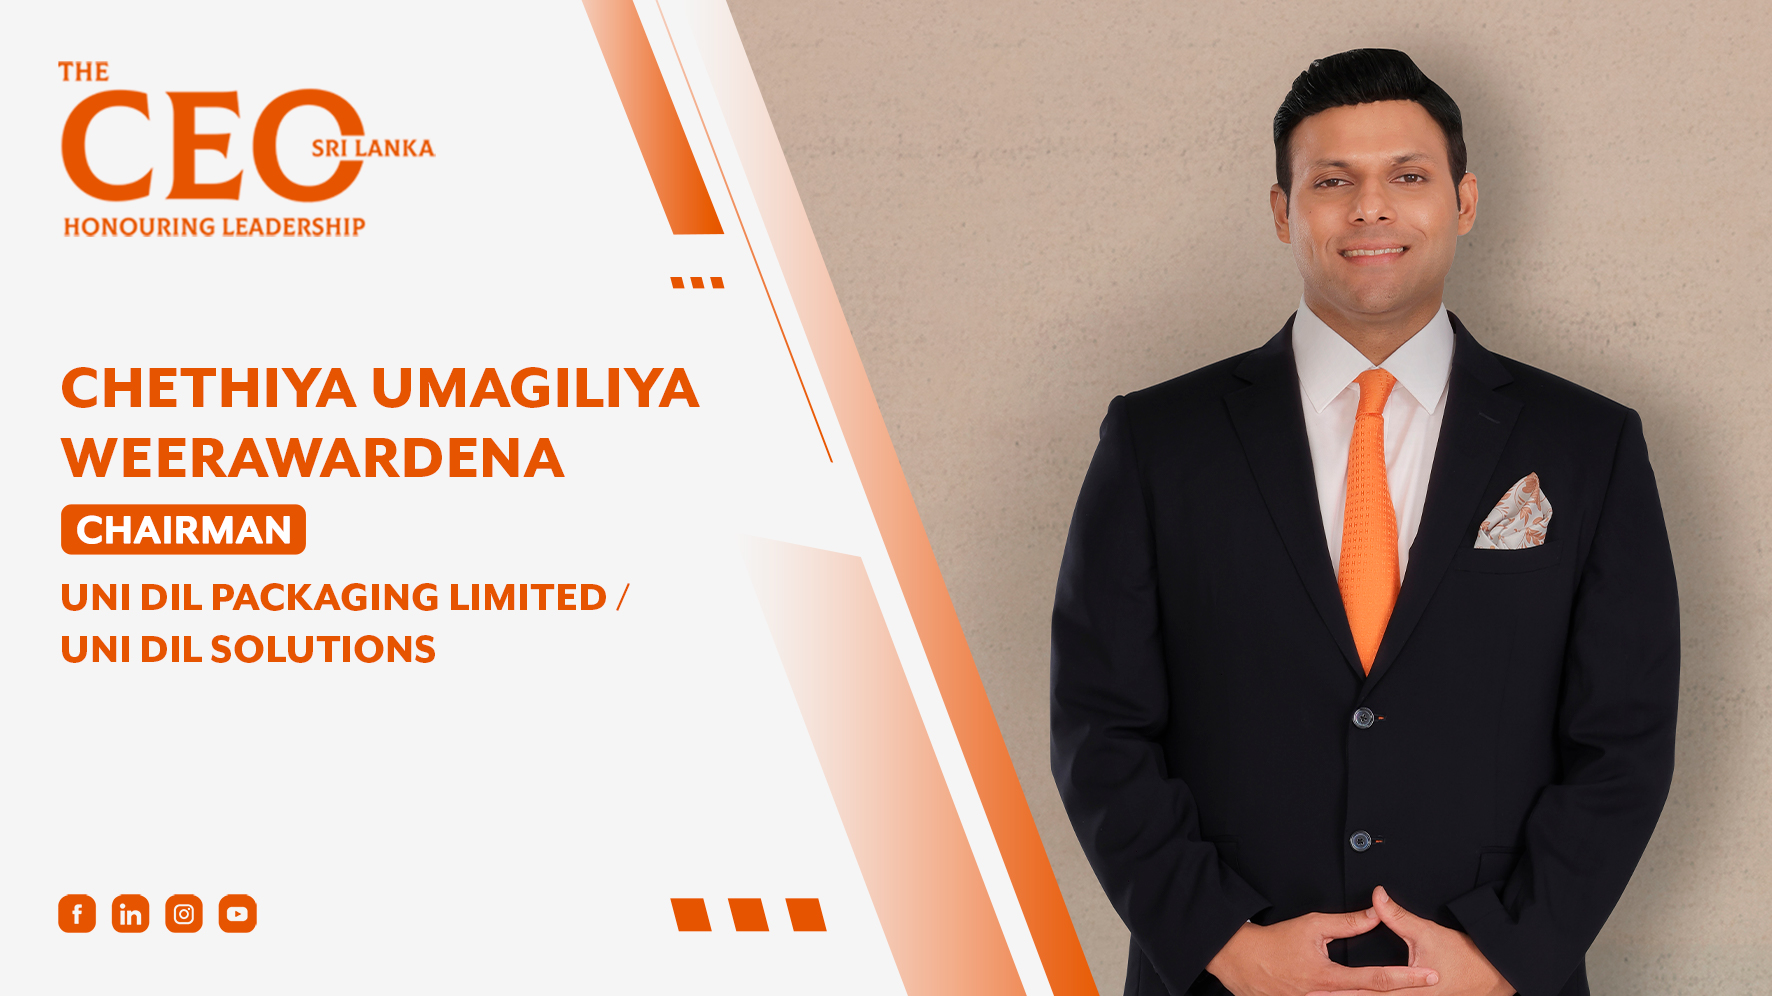 In conversation with Chethiya Umagiliya Weerawardena – Chairman of Uni Dil Packaging Limited / Uni Dil Solutions